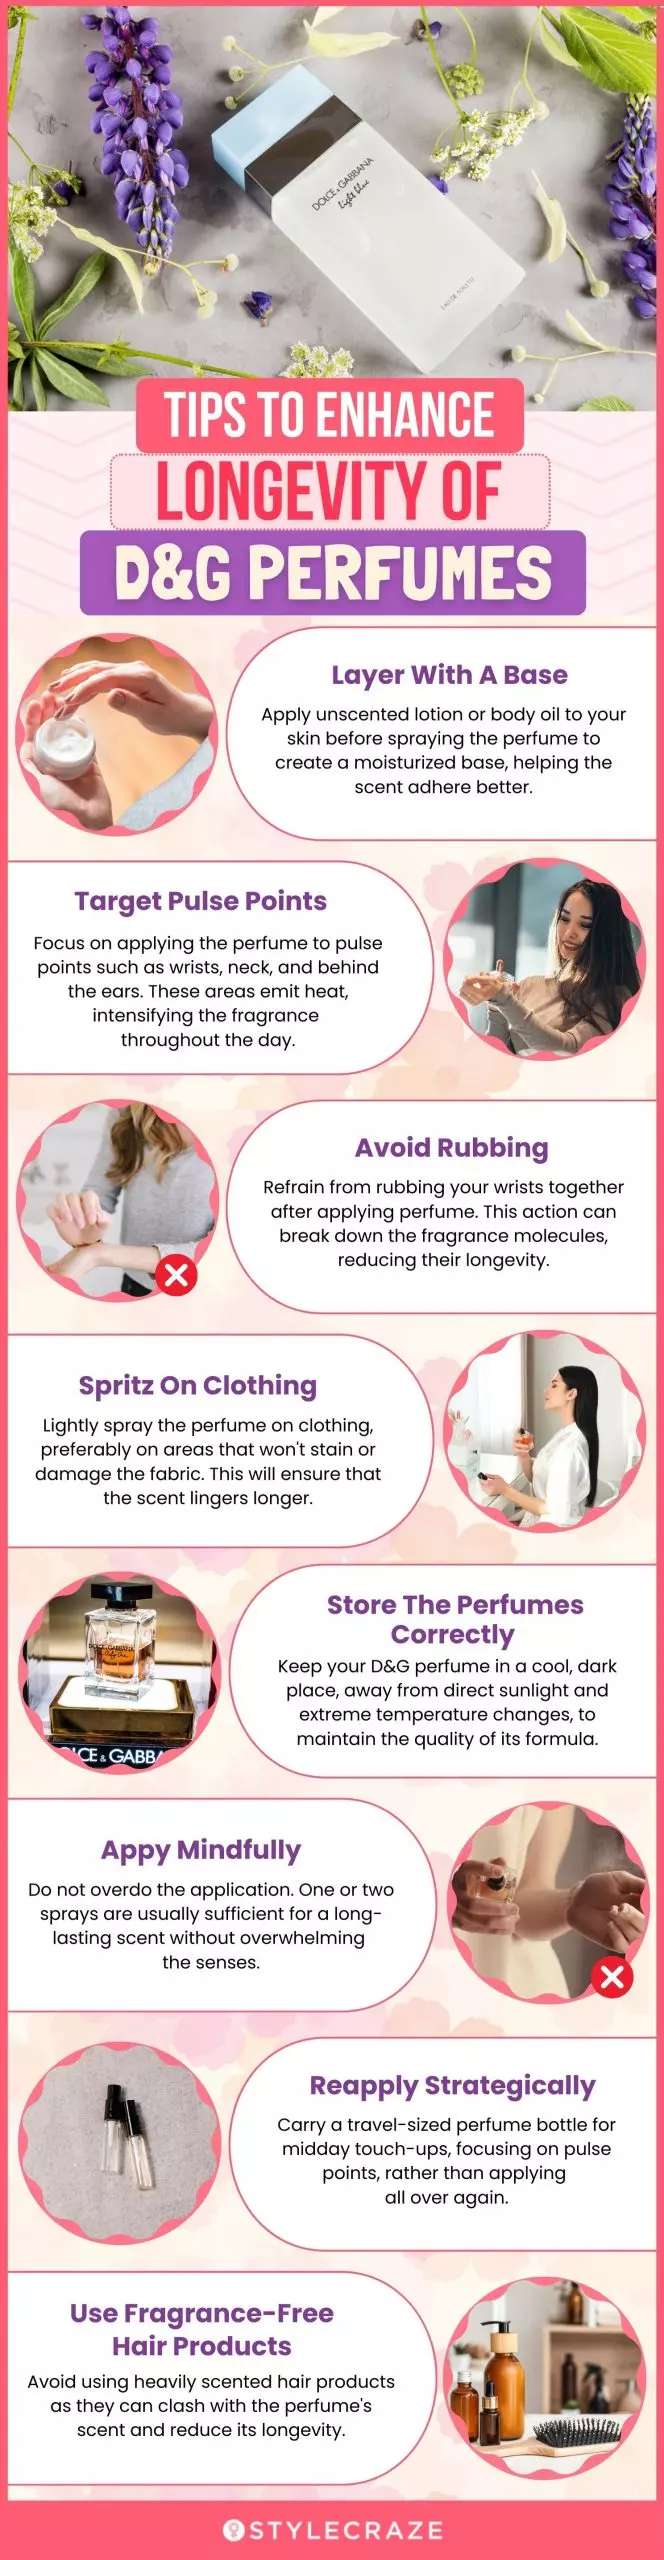 Tips To Enhance Longevity Of D&G Perfumes (infographic)